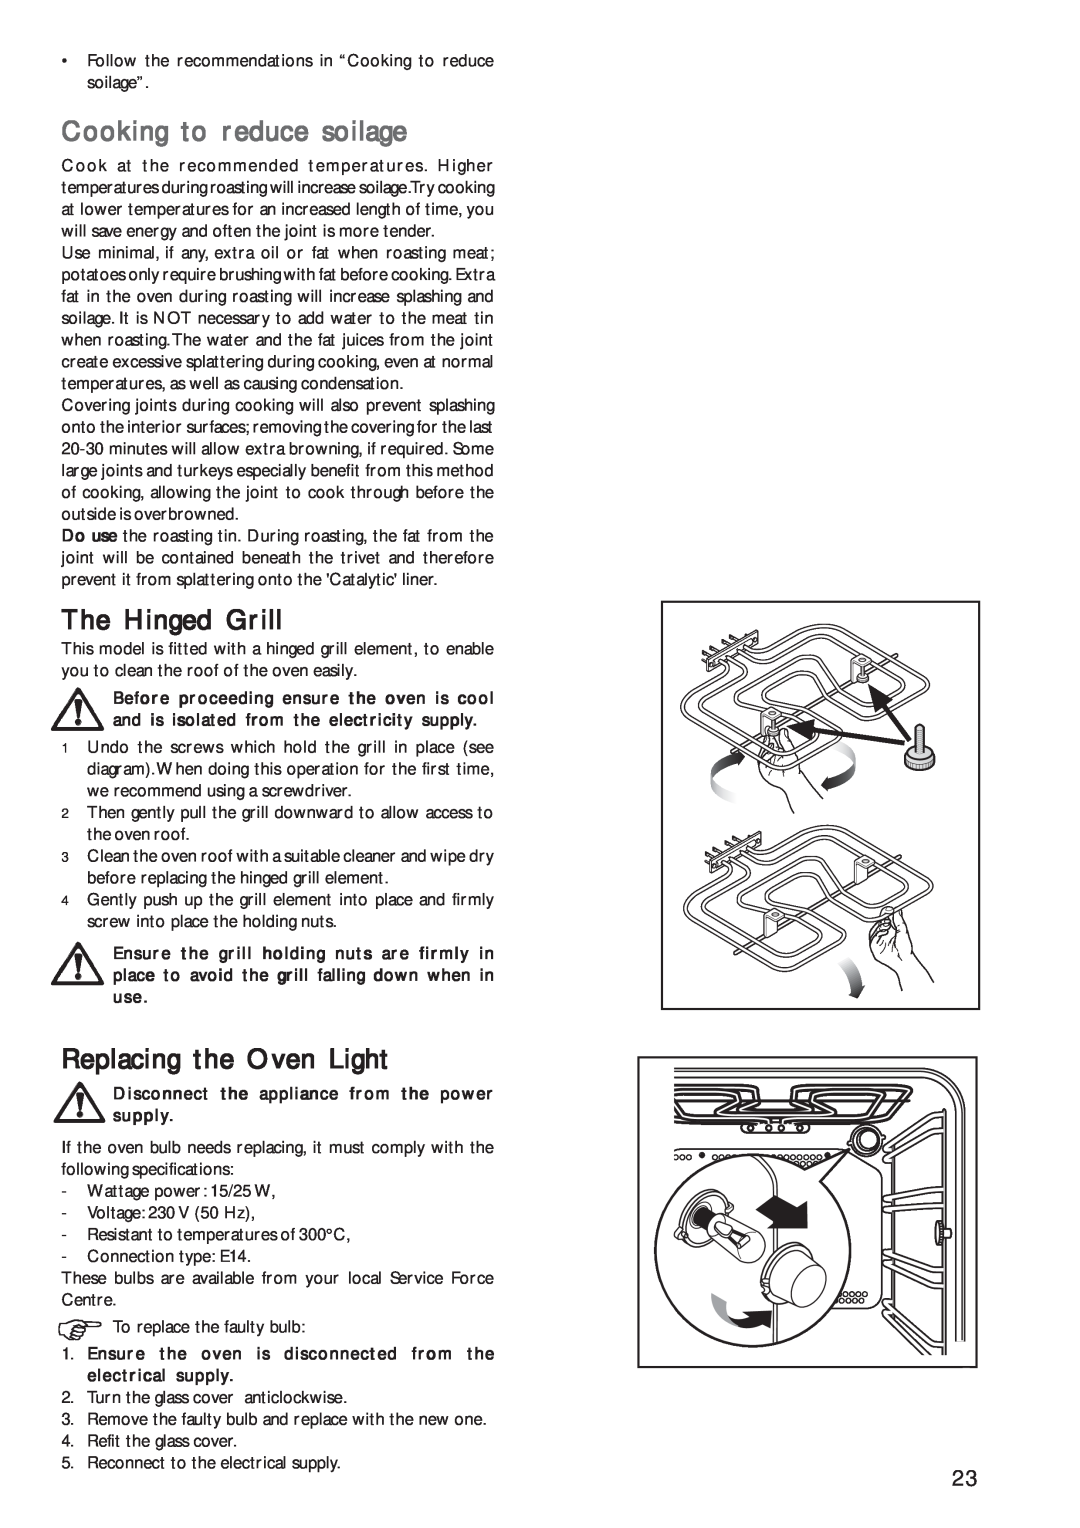 John Lewis JLBIOS602 instruction manual Cooking to reduce soilage, The Hinged Grill, Replacing the Oven Light 